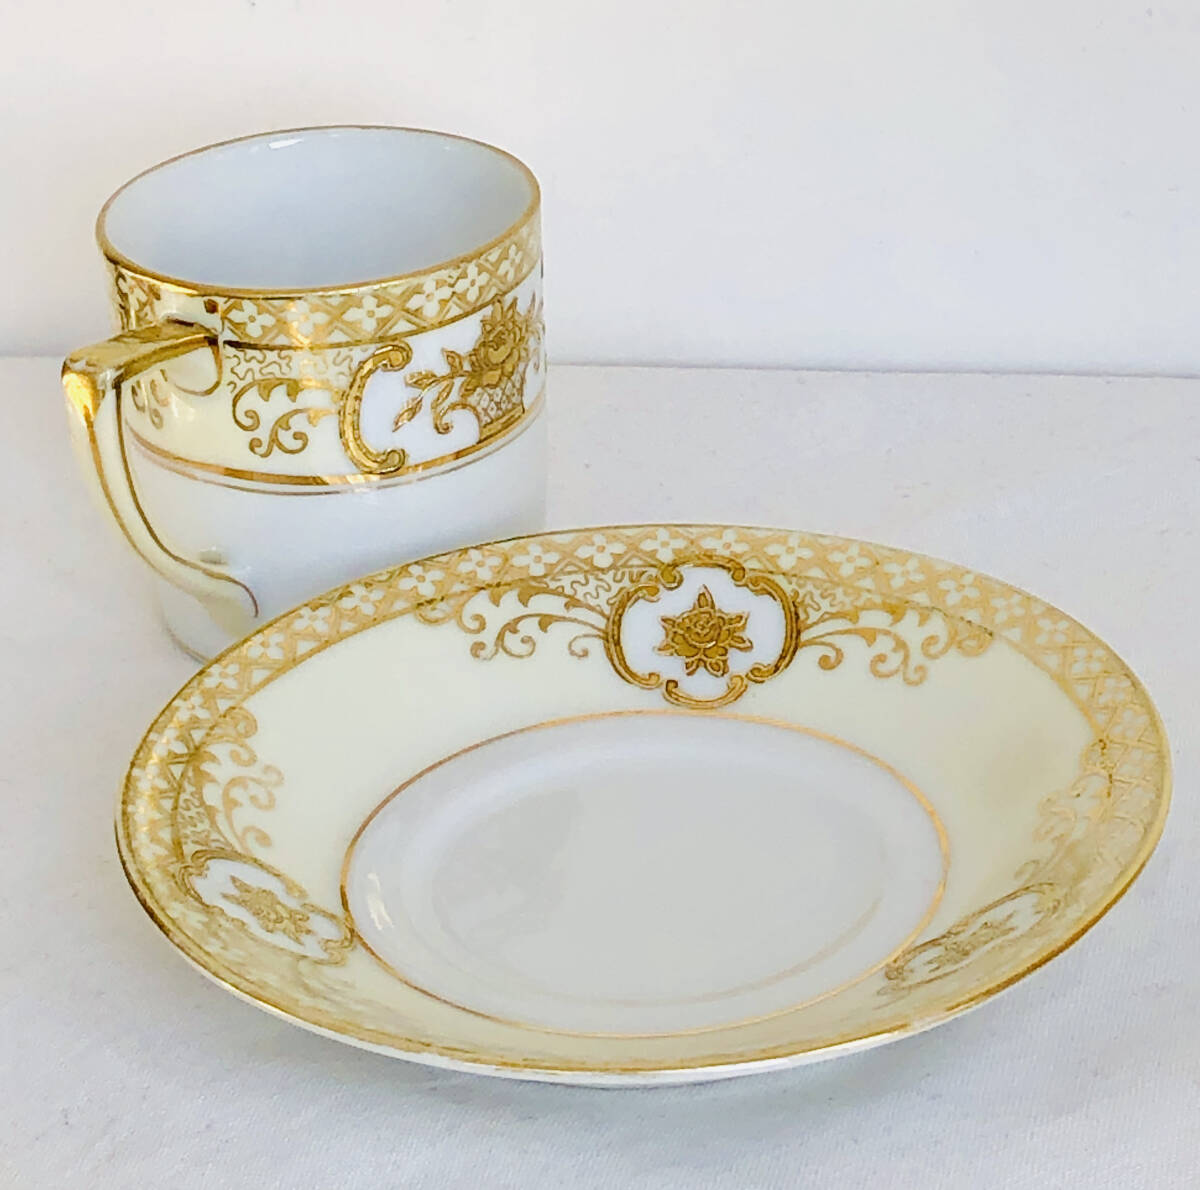 1910 period Old Noritake maru ki seal peak up gold paint hand paint Gold flower pattern small cup and saucer A